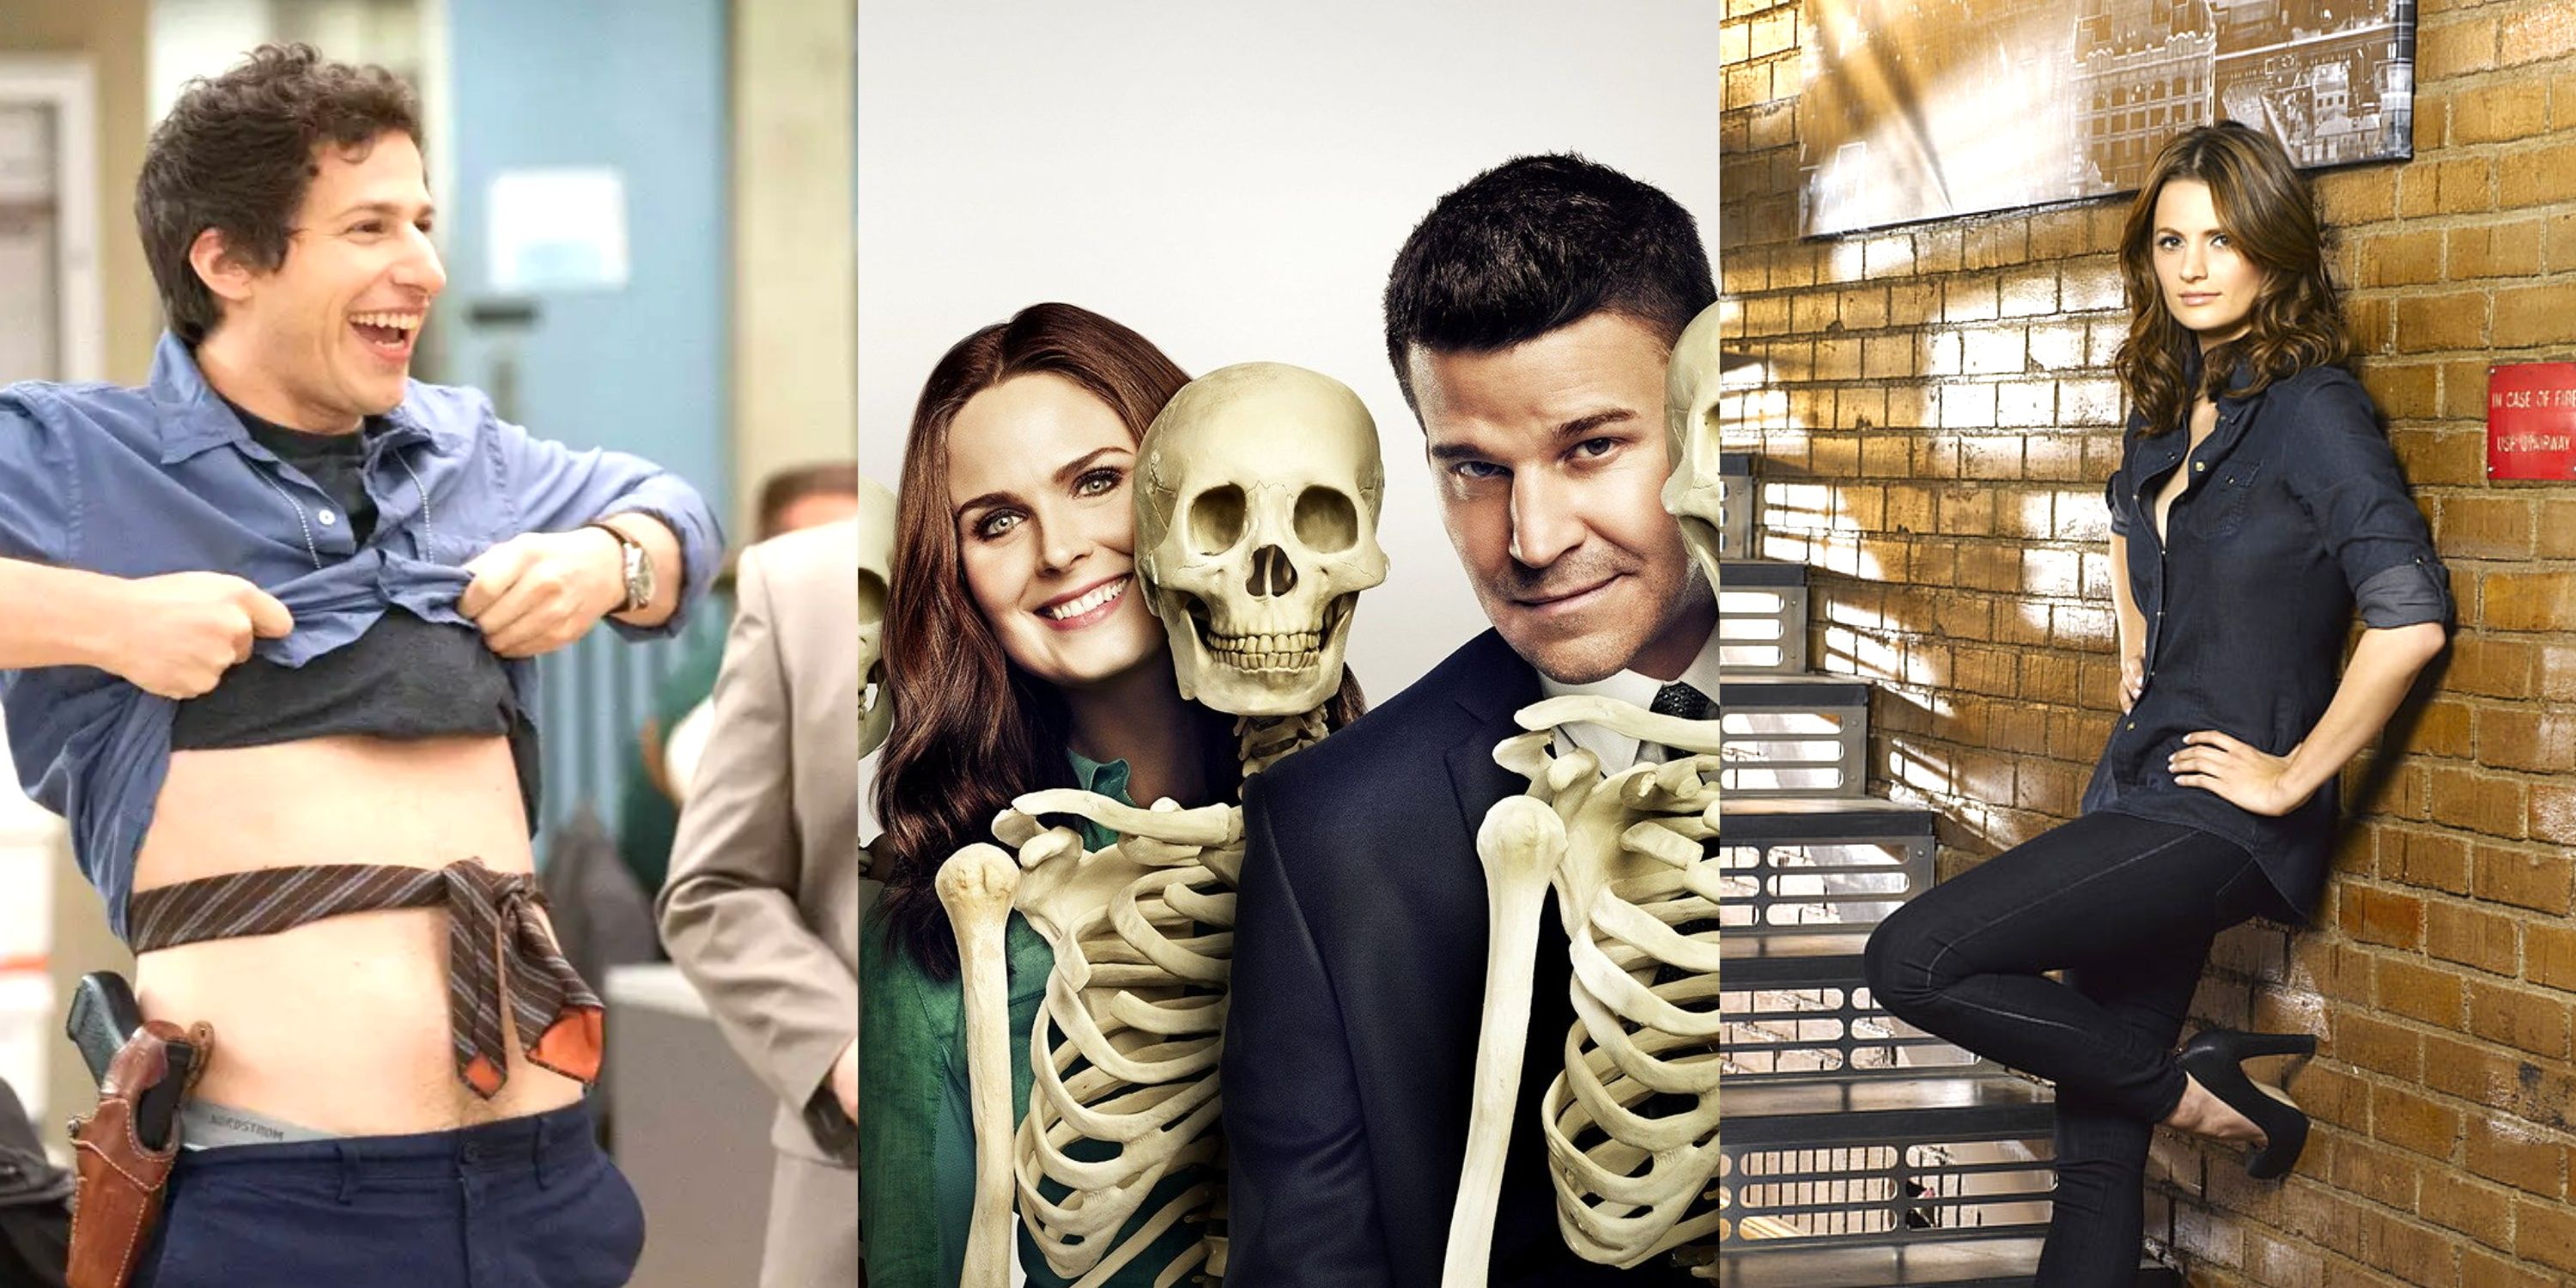 Jake Peralta from Brooklyn Nine Nine, Booth and Brennan pose with skulls in Bones, Beckett poses in Castle.